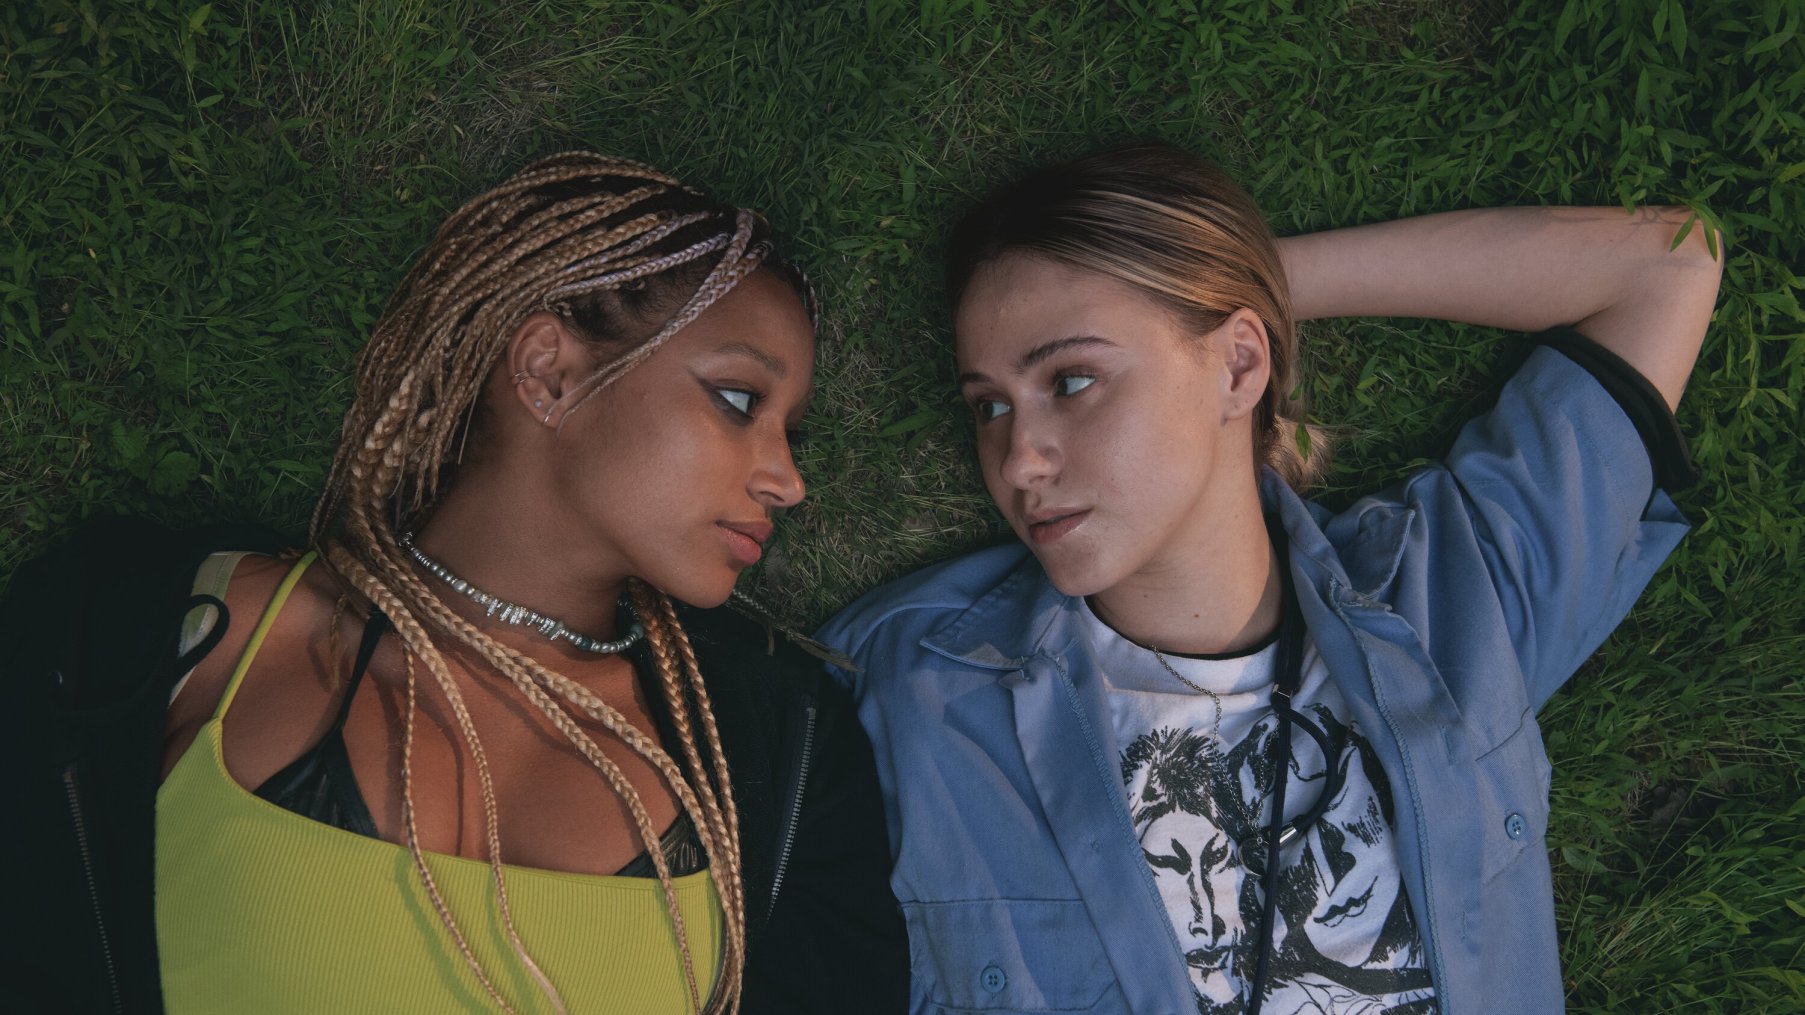 A still from 'Bodies Bodies Bodies'. Sophie (Amandla Stenberg) and Bee (Maria Bakalova) share a moment looking at each other laying on the grass.